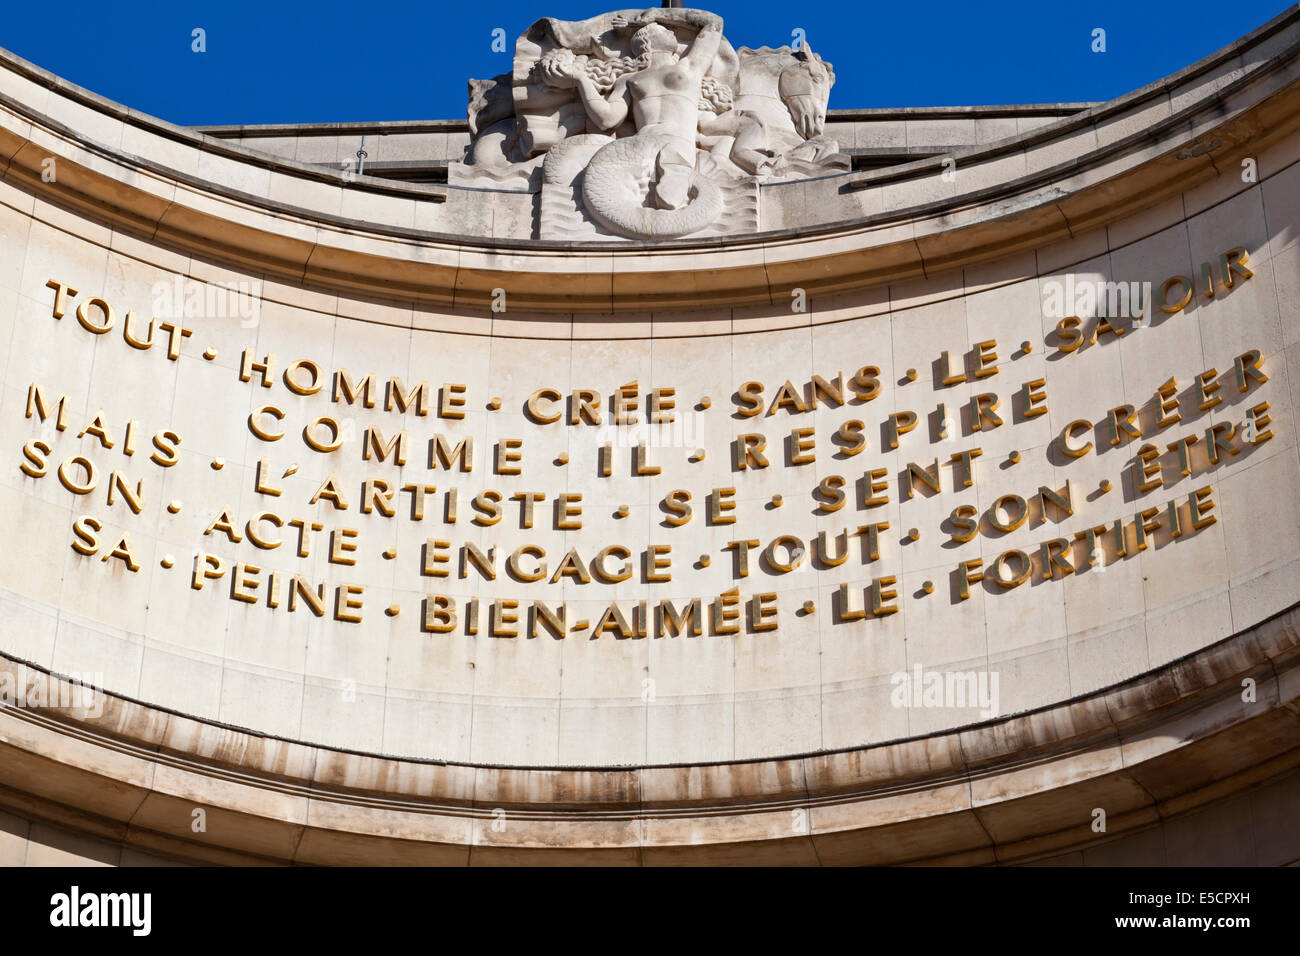 Gold inscriptions of quotations by French poet Paul Valery decorate the upper facade of the Musee de l'Homme (Museum of Man) Stock Photo